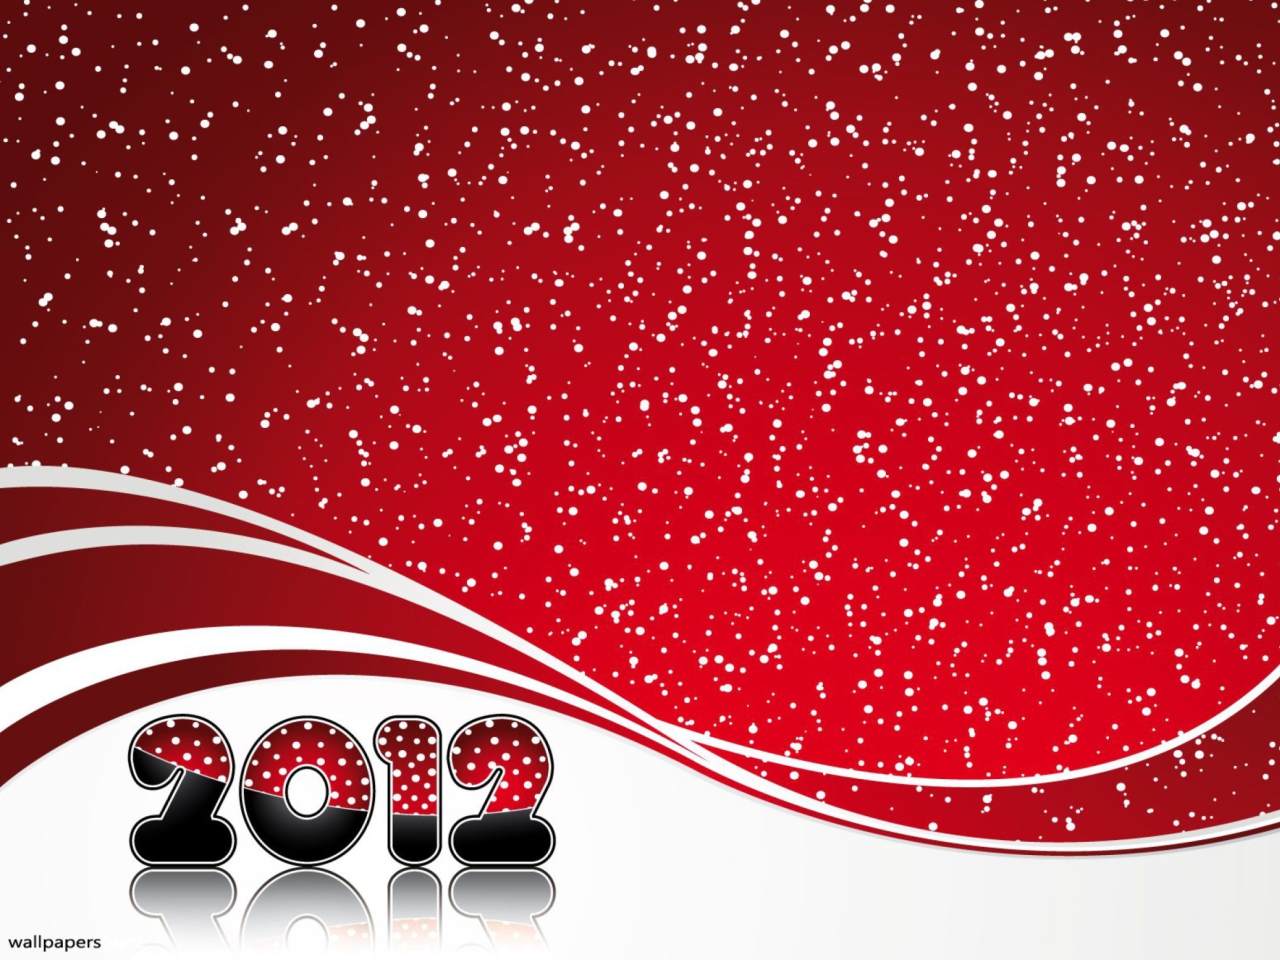 Red Snow New Year wallpaper 1280x960